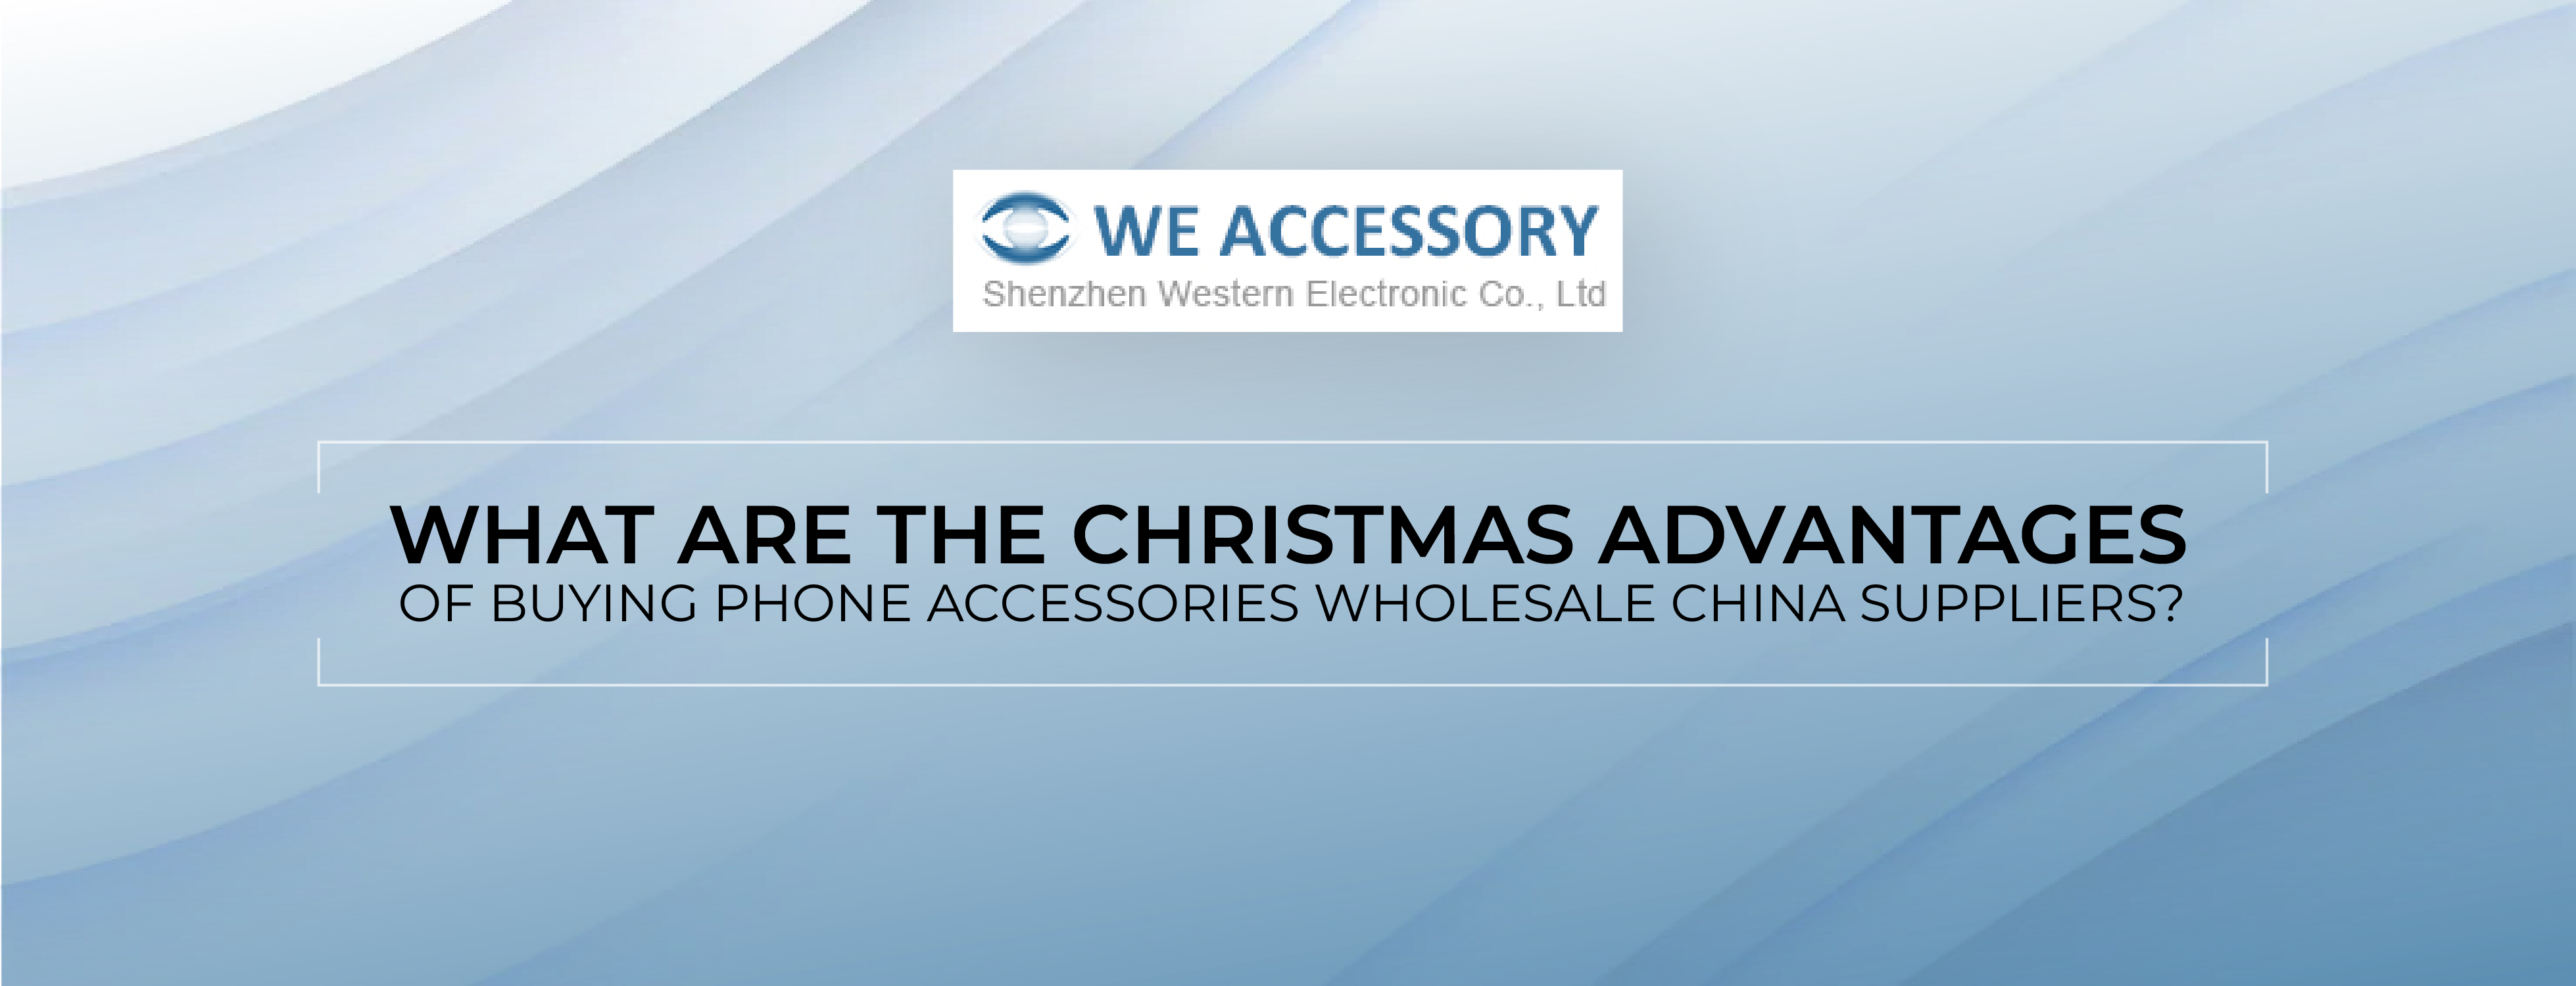 What are the Christmas advantages of Buying Phone Accessories Wholesale China Suppliers